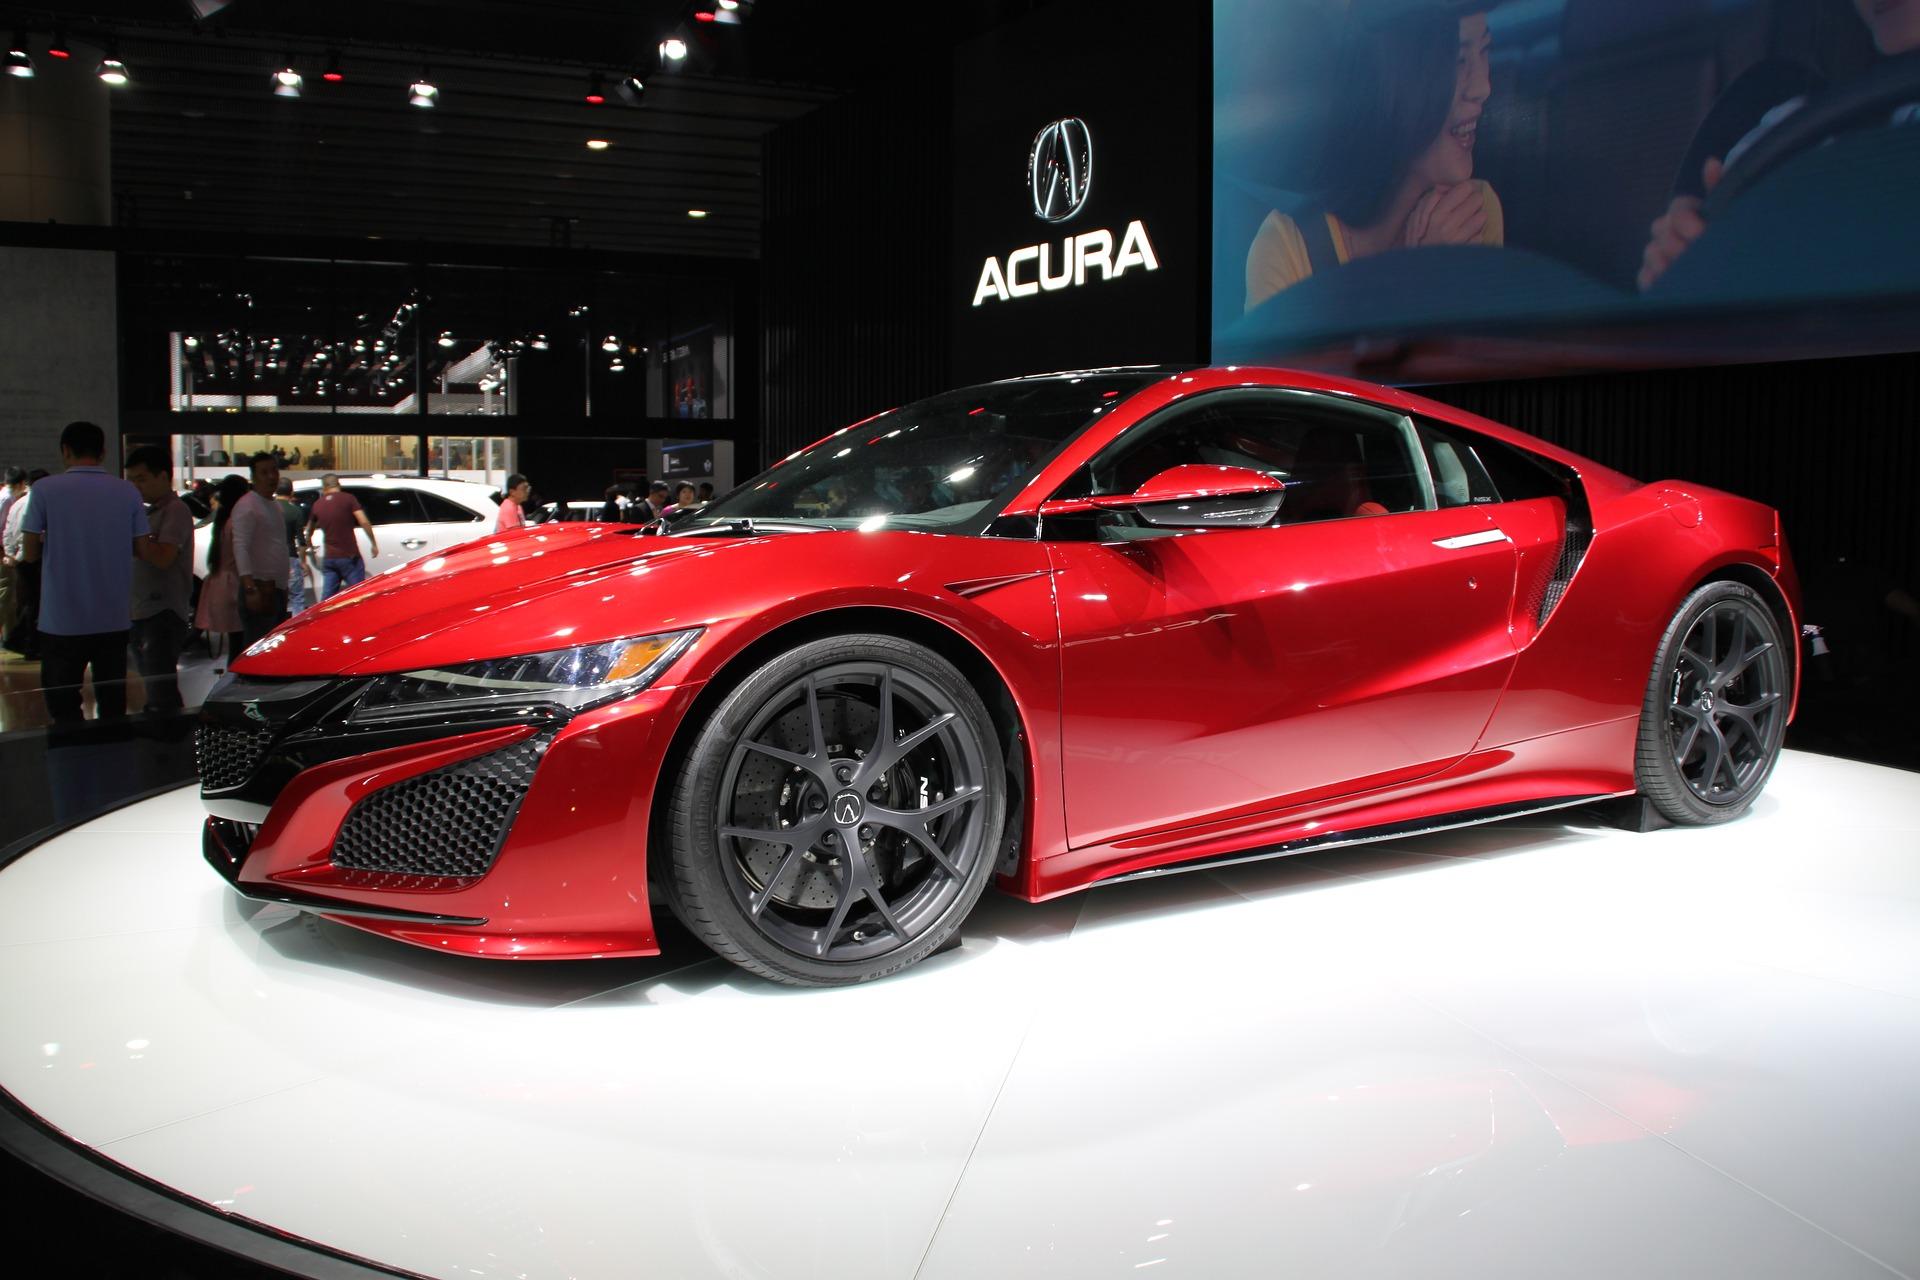 Who knew that the popular Acura brand was once considered a gamble?